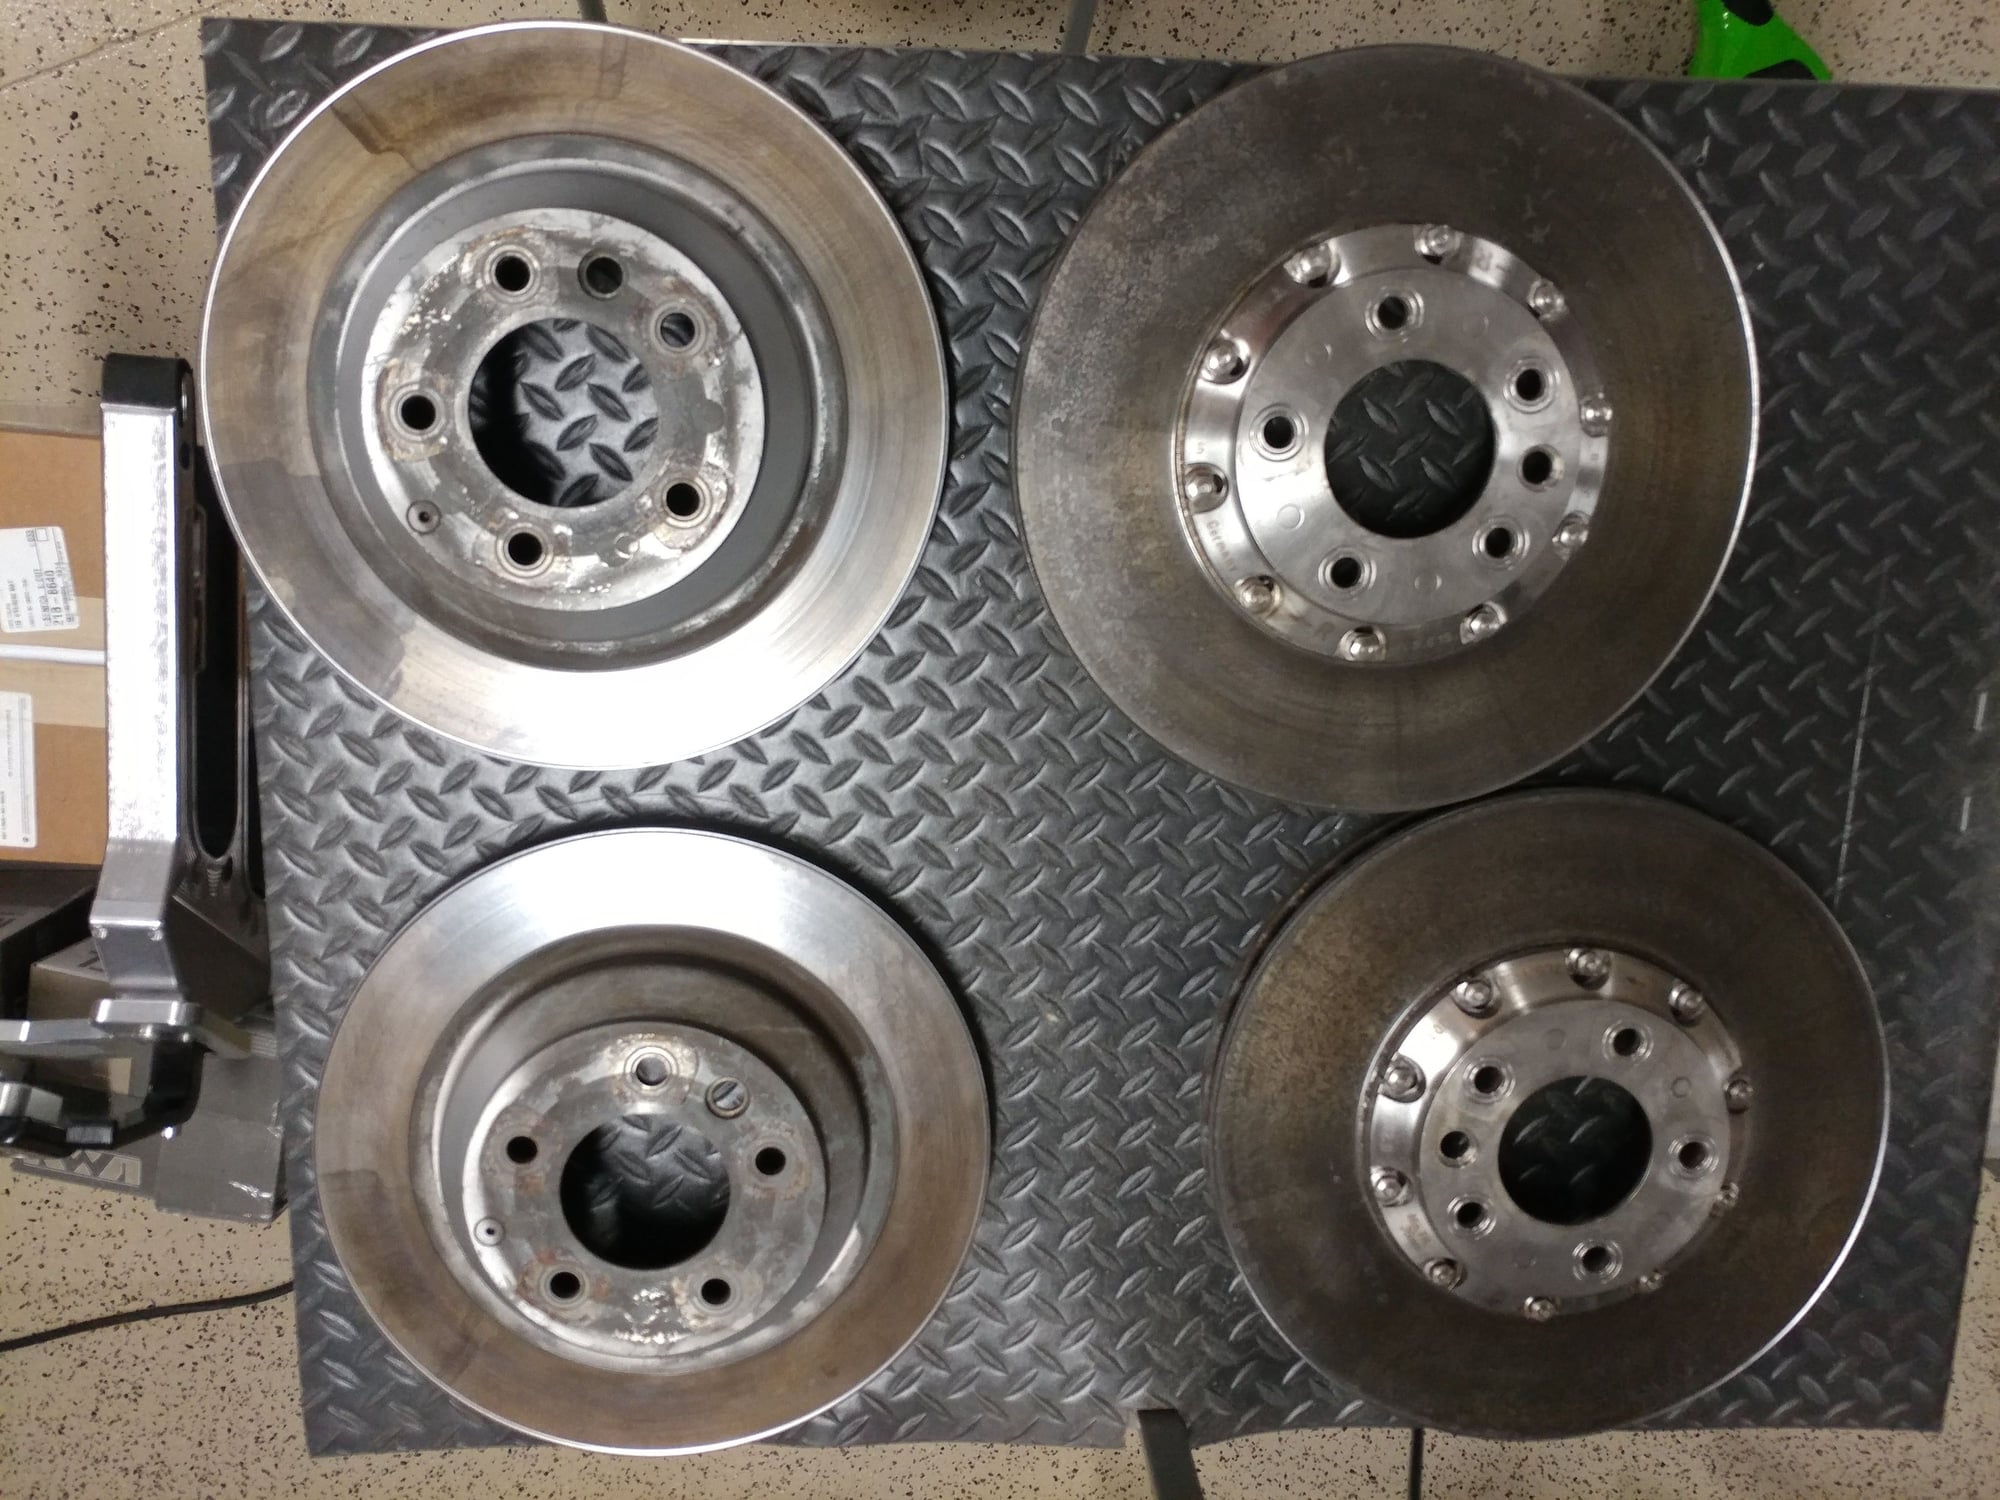 Brakes - Complete 957 Turbo S Big Red Brake Setup - 32k miles - Calipers, Rotors, lines, pads, - Used - 2005 to 2010 Porsche Cayenne - Seneca, SC 29672, United States